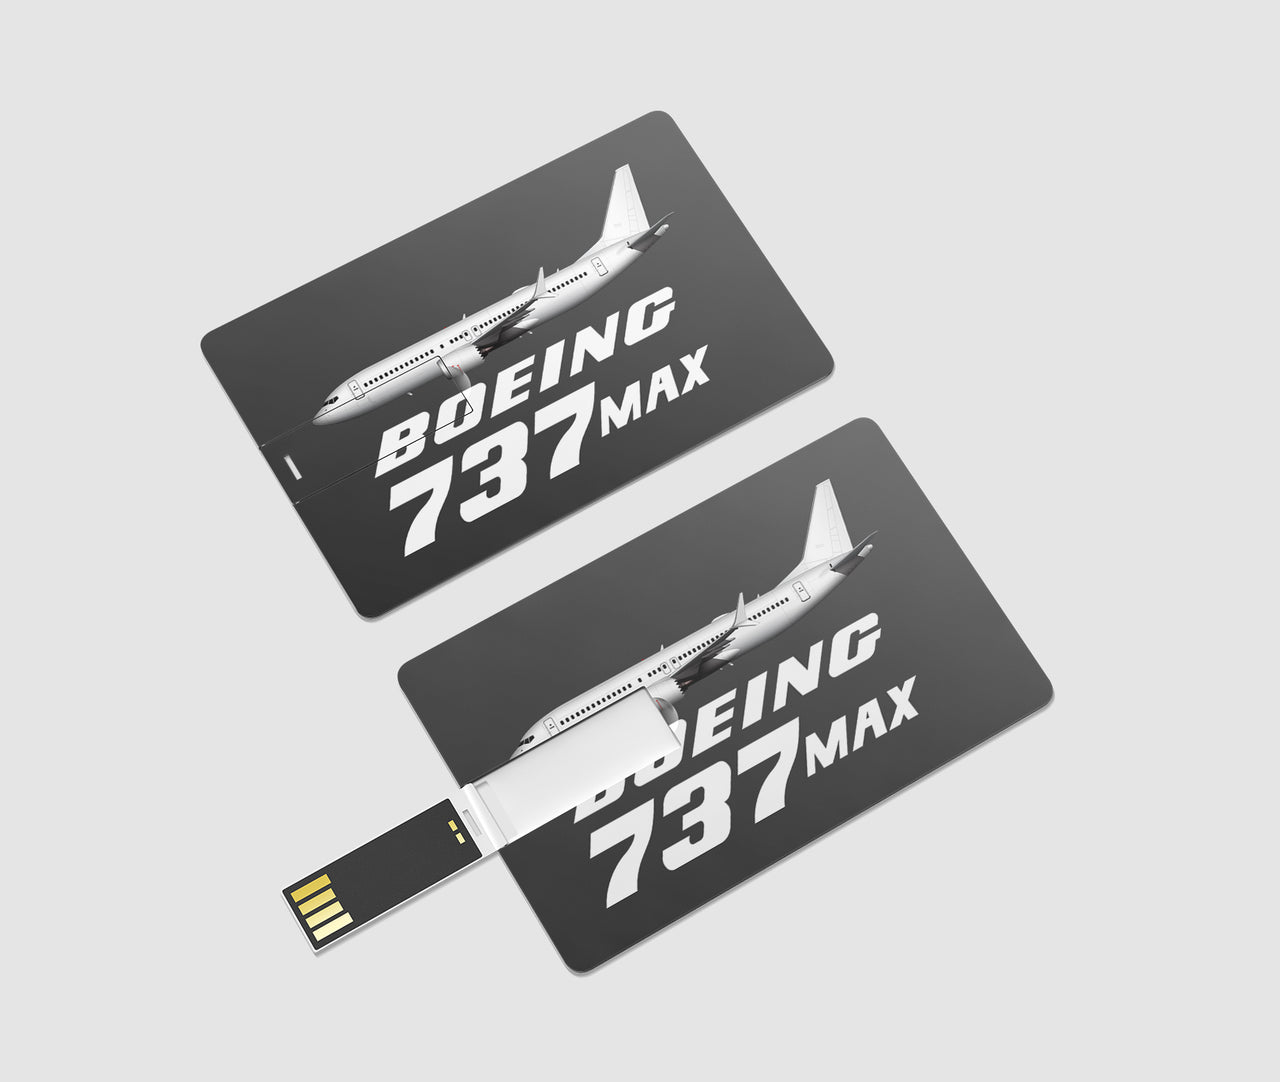 The Boeing 737Max Designed USB Cards